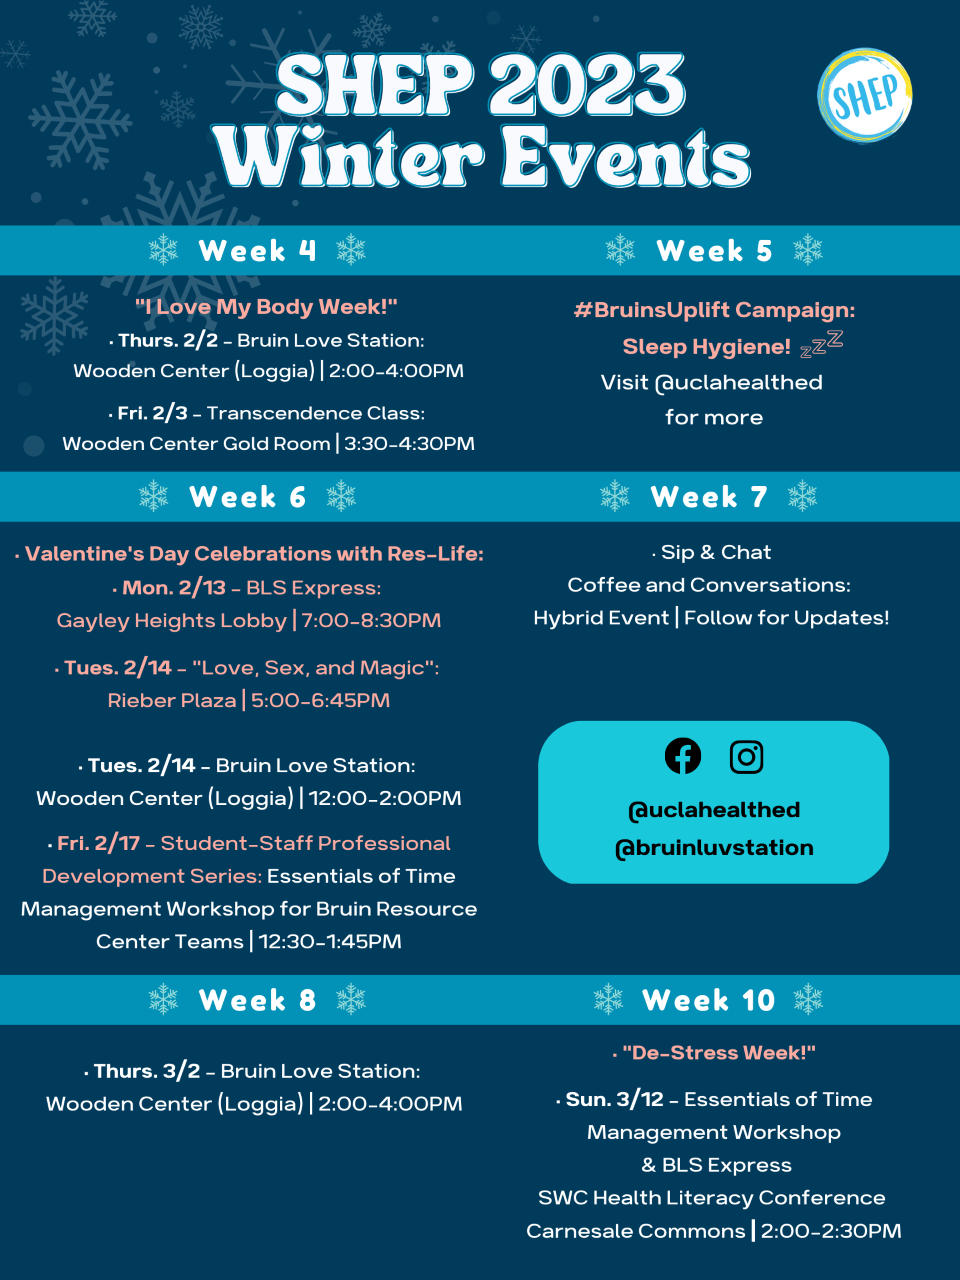 SHEP Winter Events 